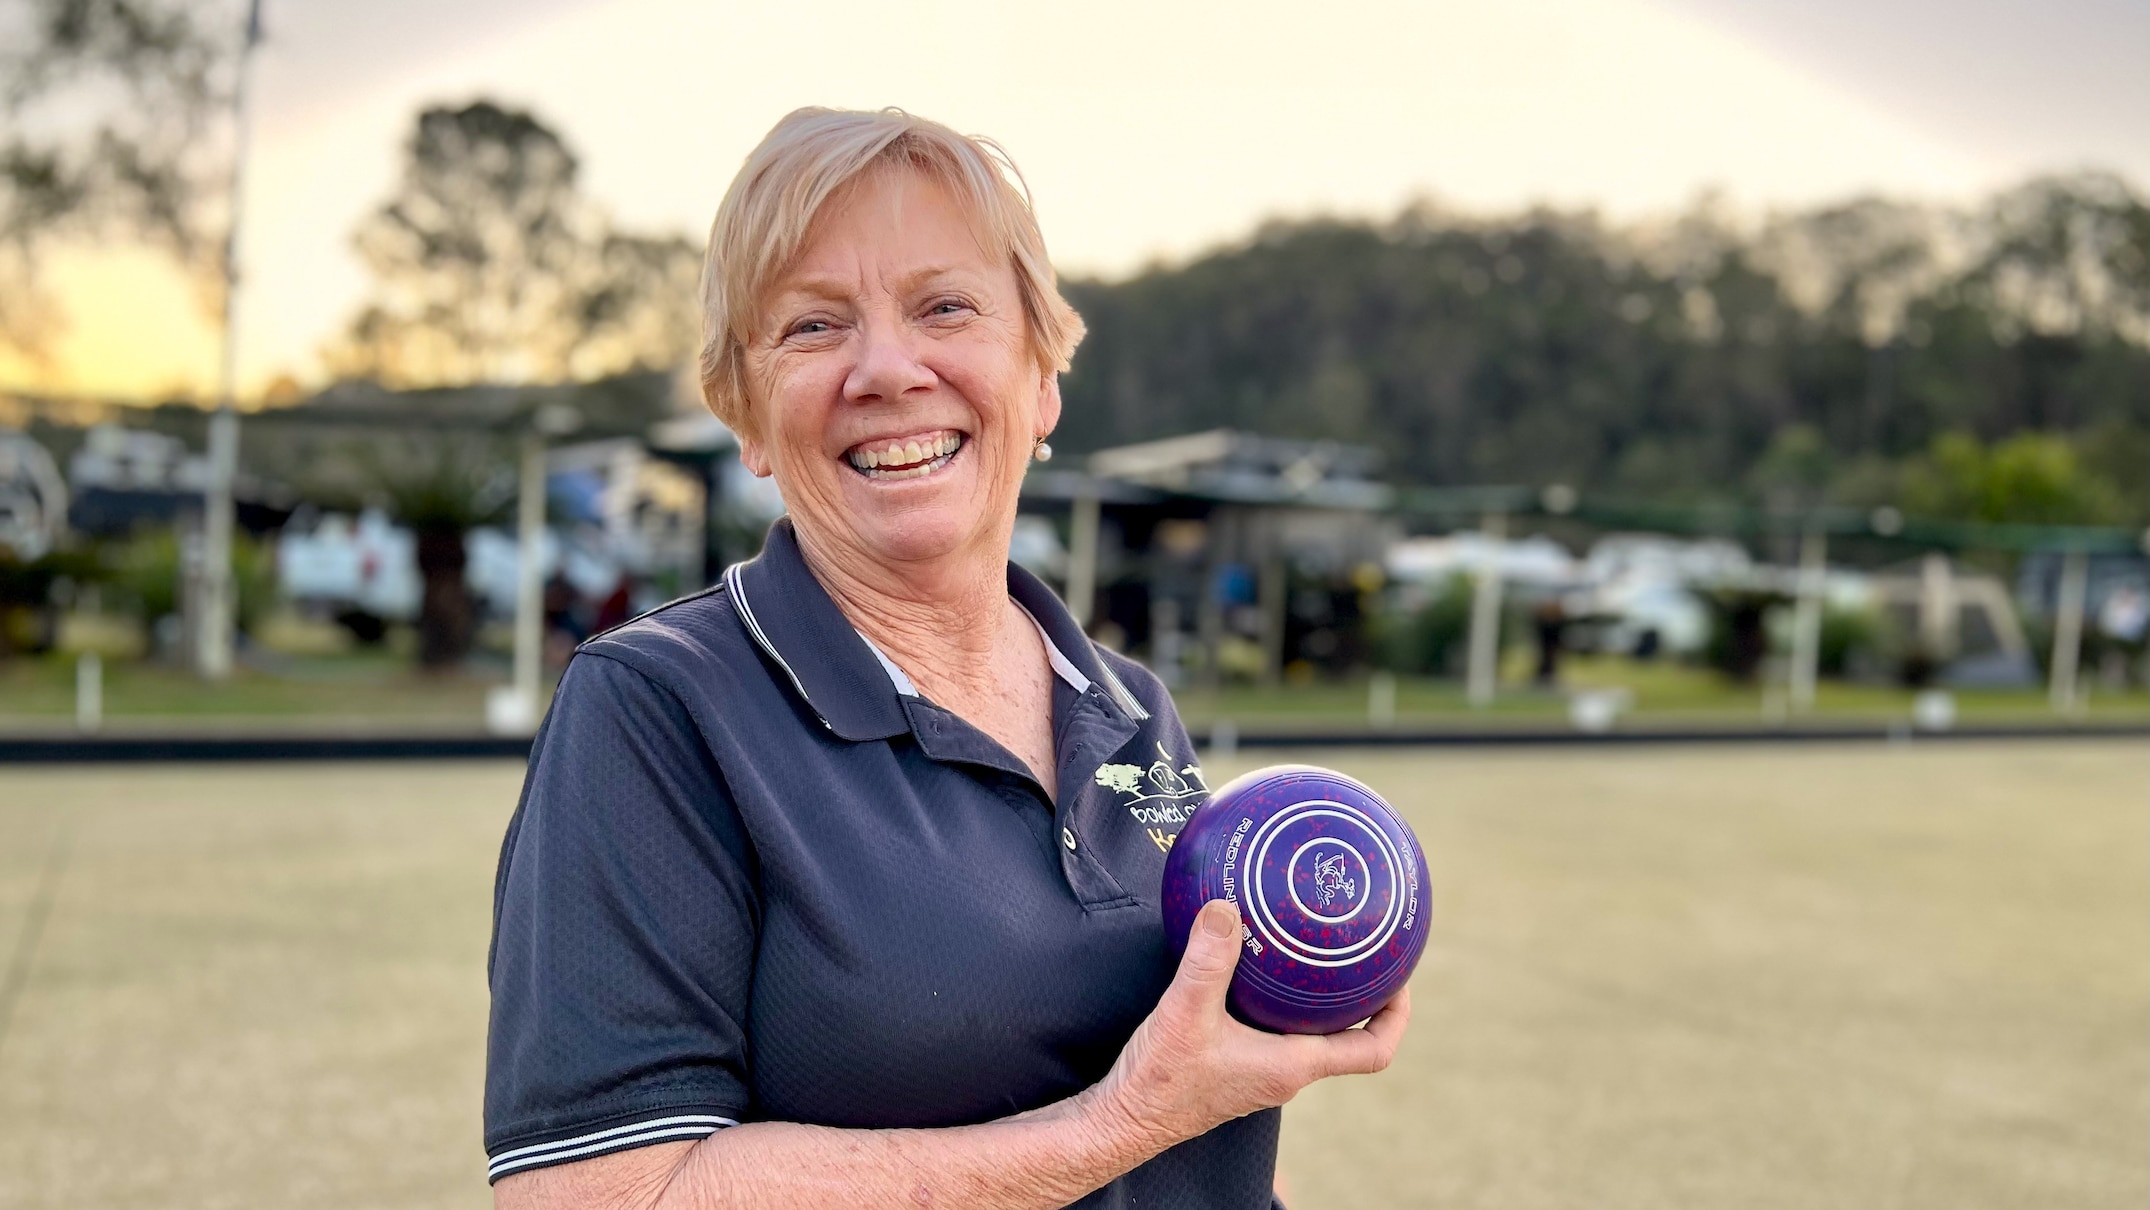 kandanga bowls club thrives after adding campsite — will others follow suit?